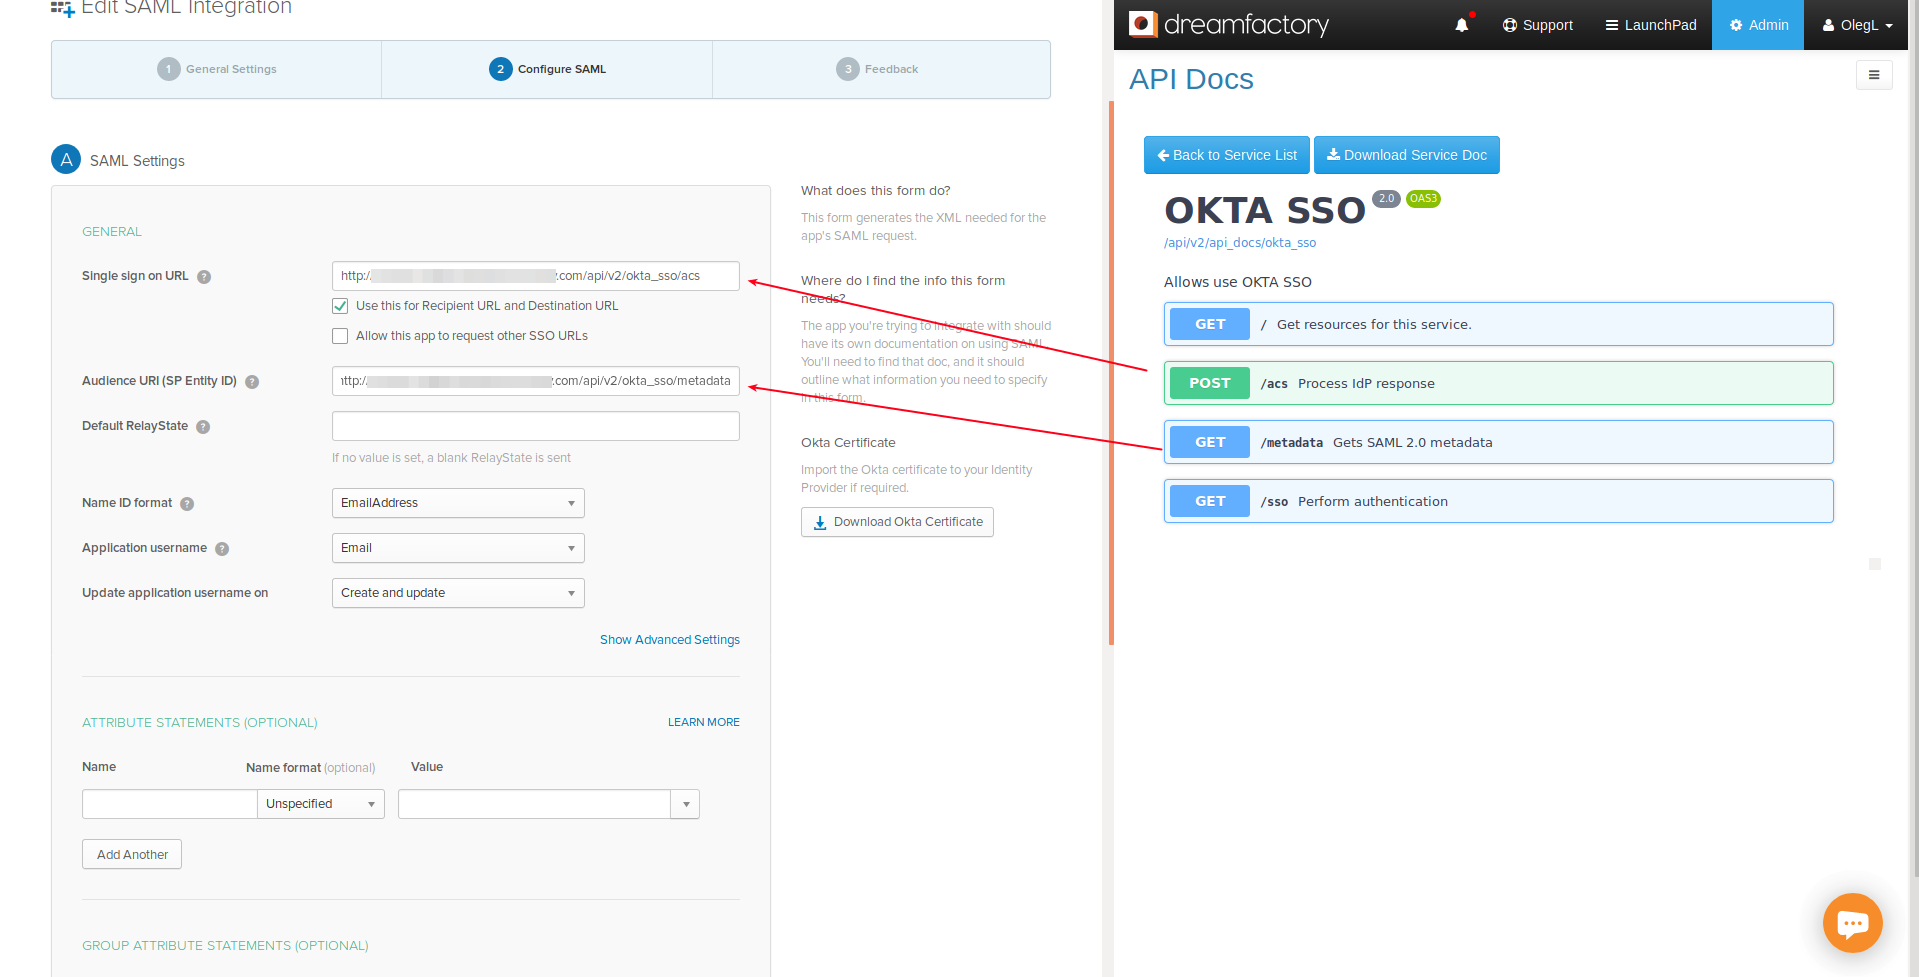 Change SSO and URI to Values in DreamFactory API Documentation